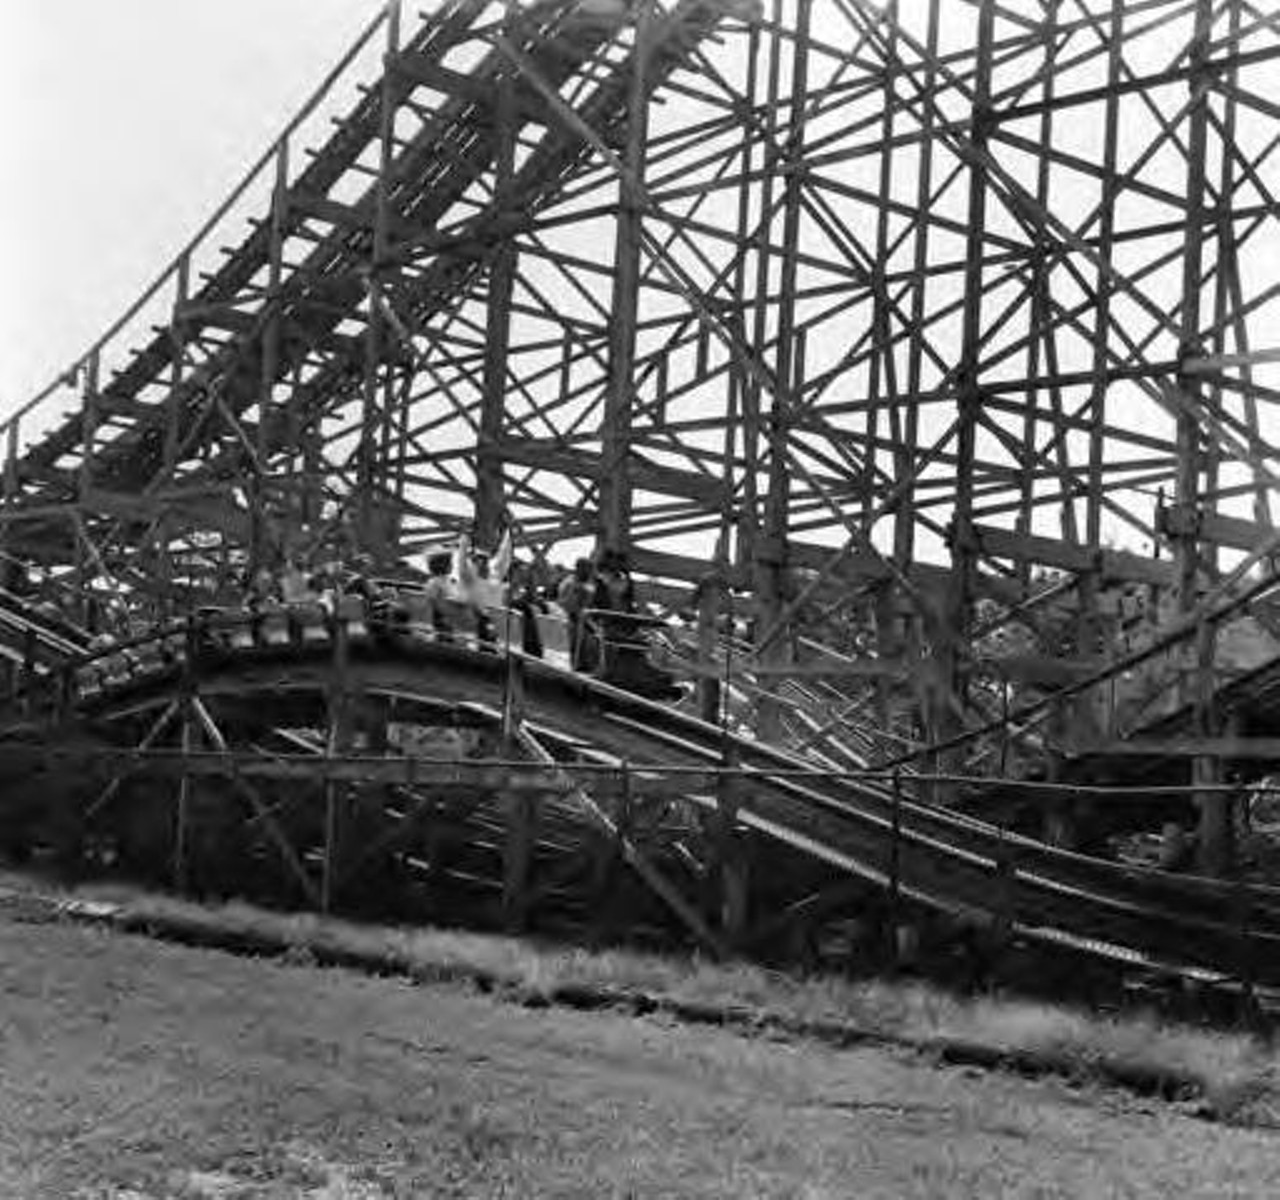 Green Thumb Club members on the roller coaster at Euclid Beach Park, August, 1965